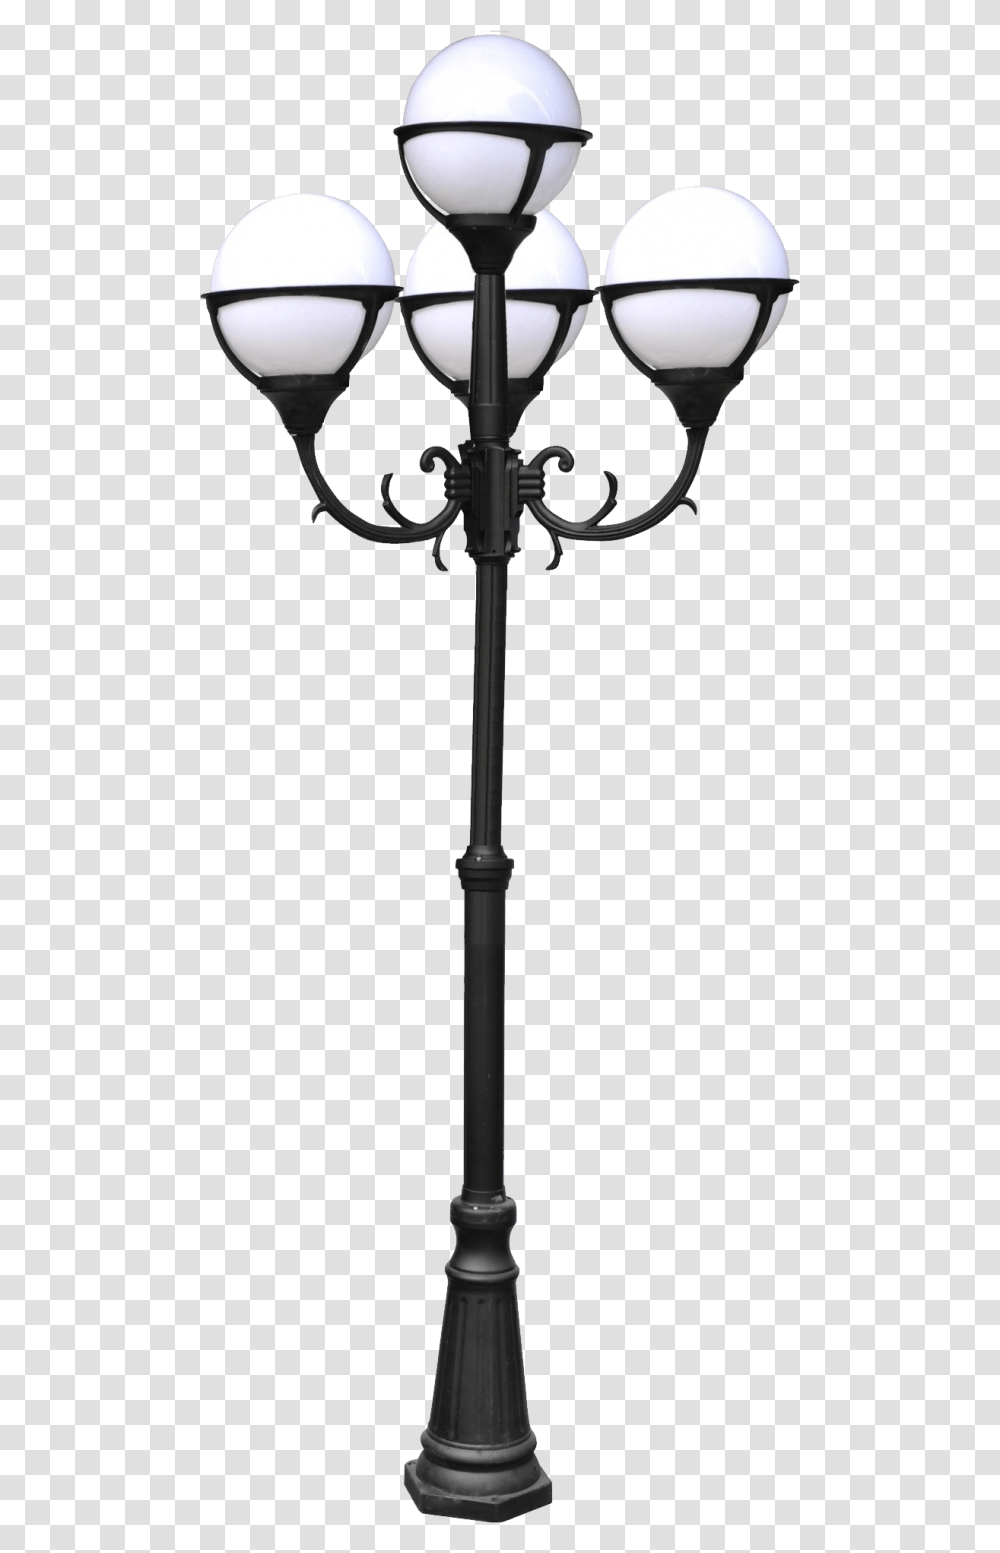 Street Light Free Download, Lamp, Coat Rack, Weapon, Weaponry Transparent Png